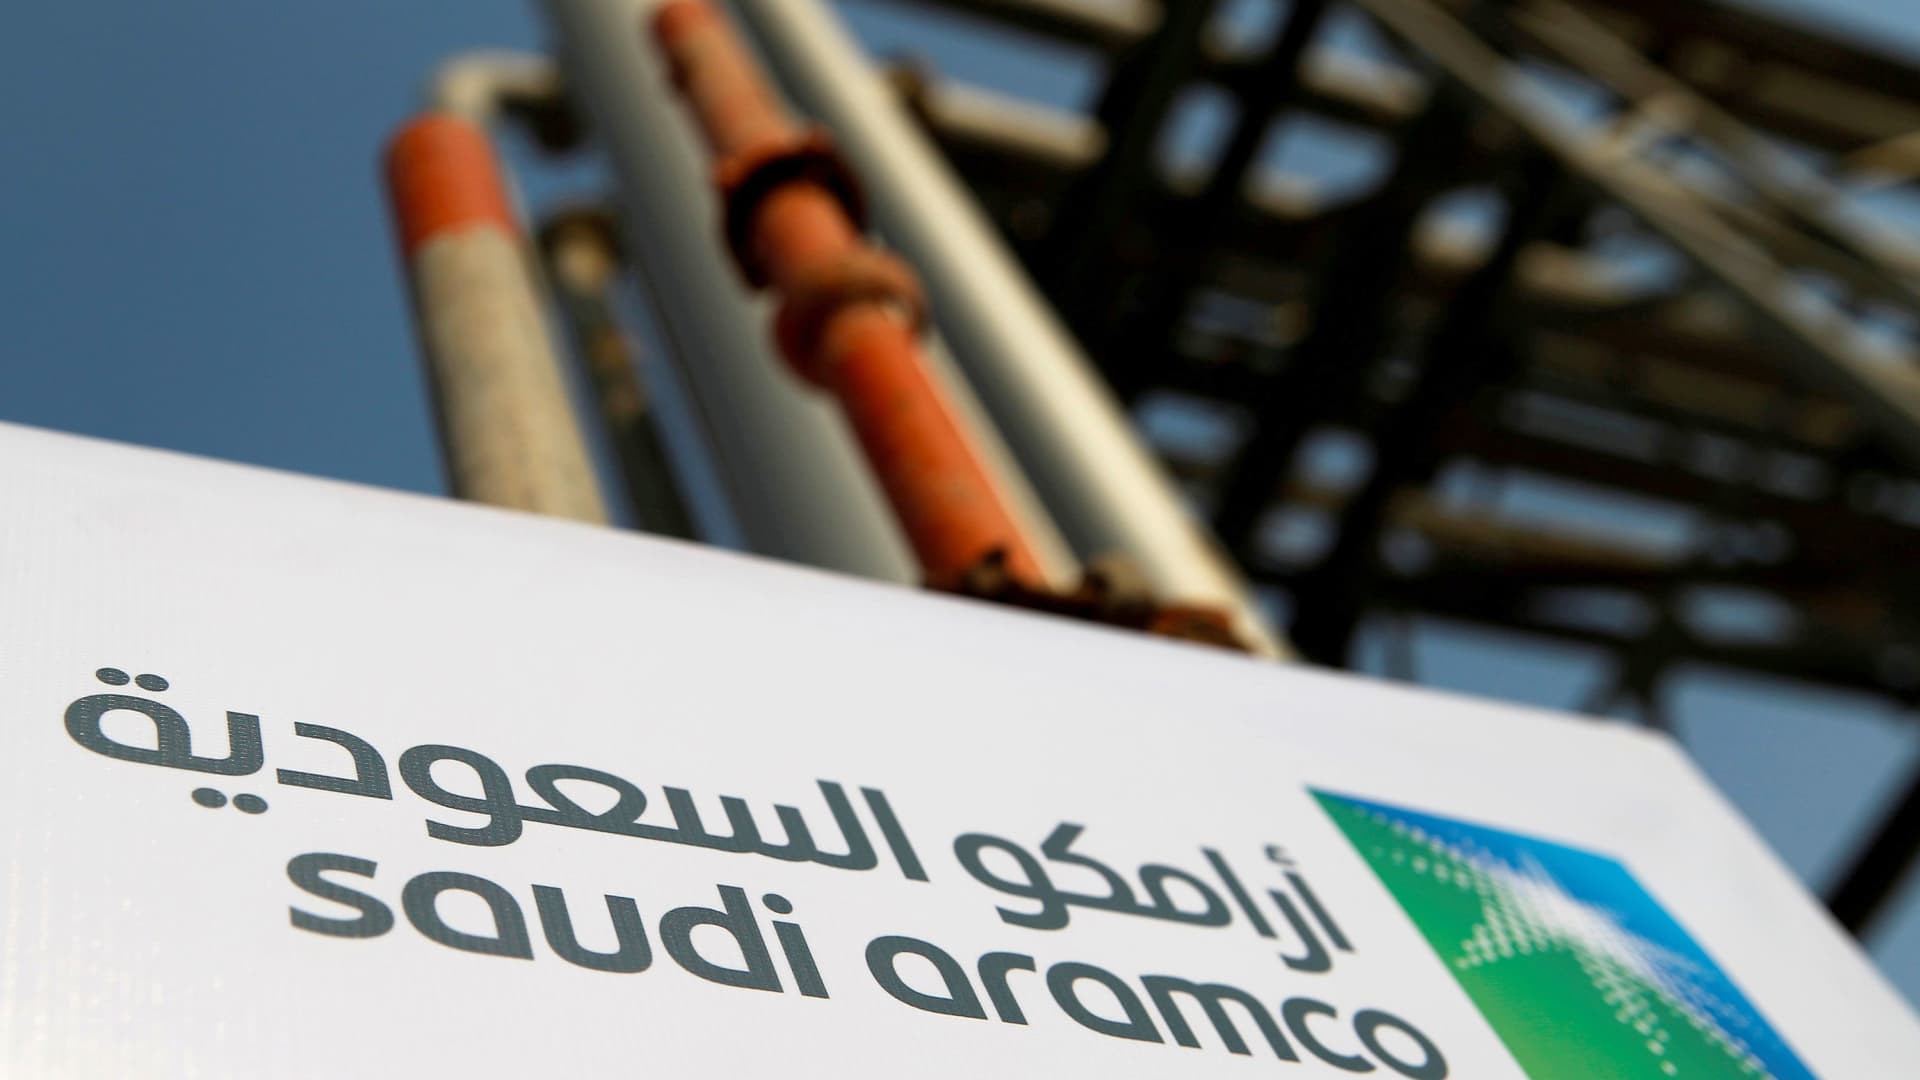 Saudi Aramco said strong market conditions helped to push its second quarter net income to $48.4 billion, up from $25.5 billion a year earlier.